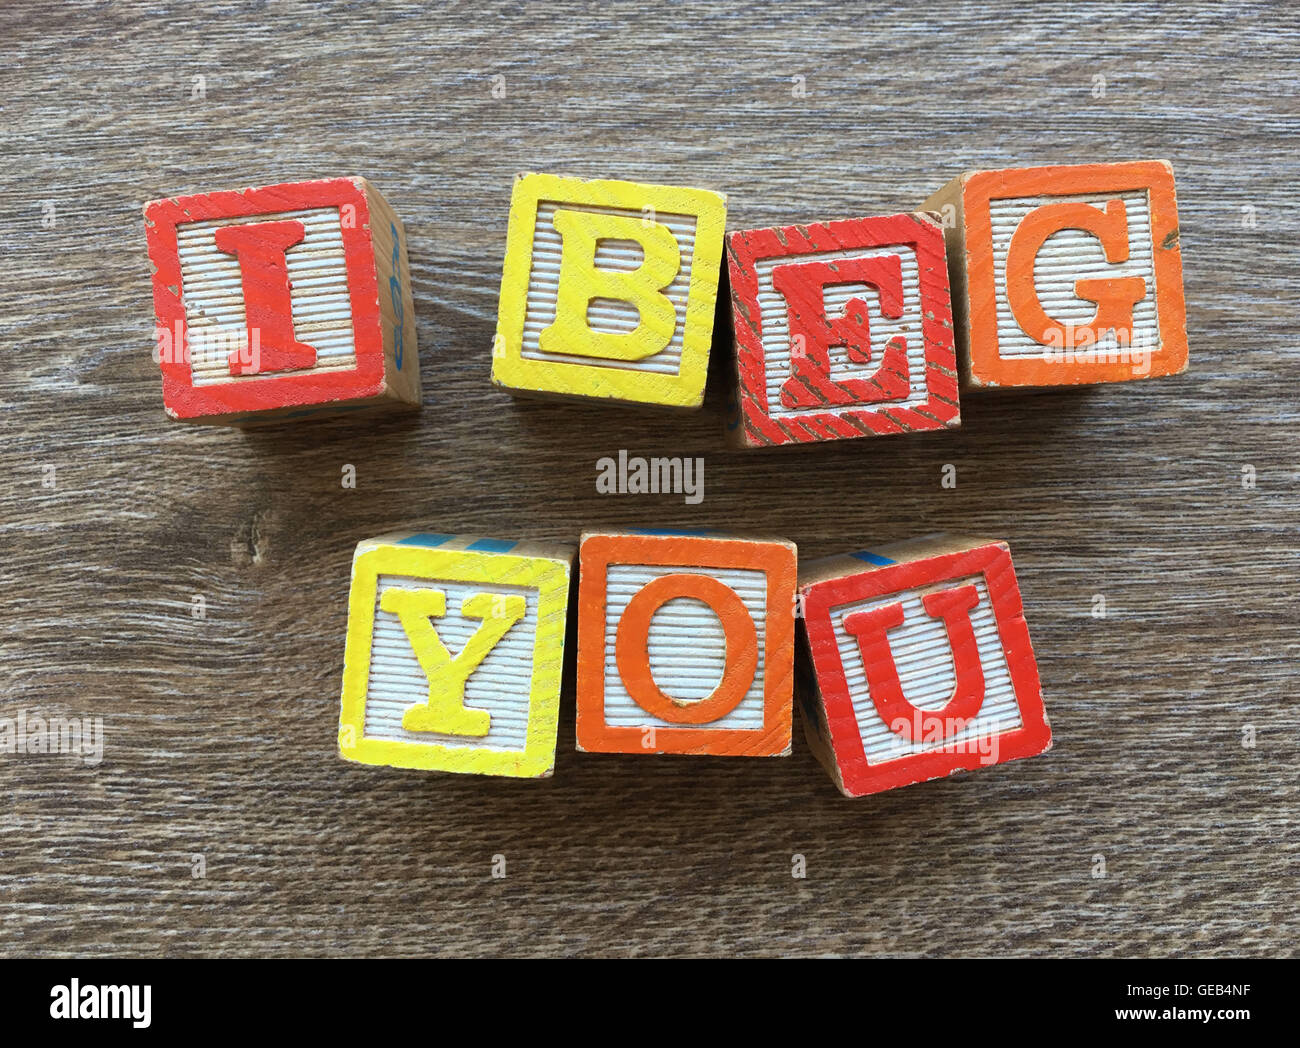 I BEG YOU sentence written with wood block letter characters Stock Photo